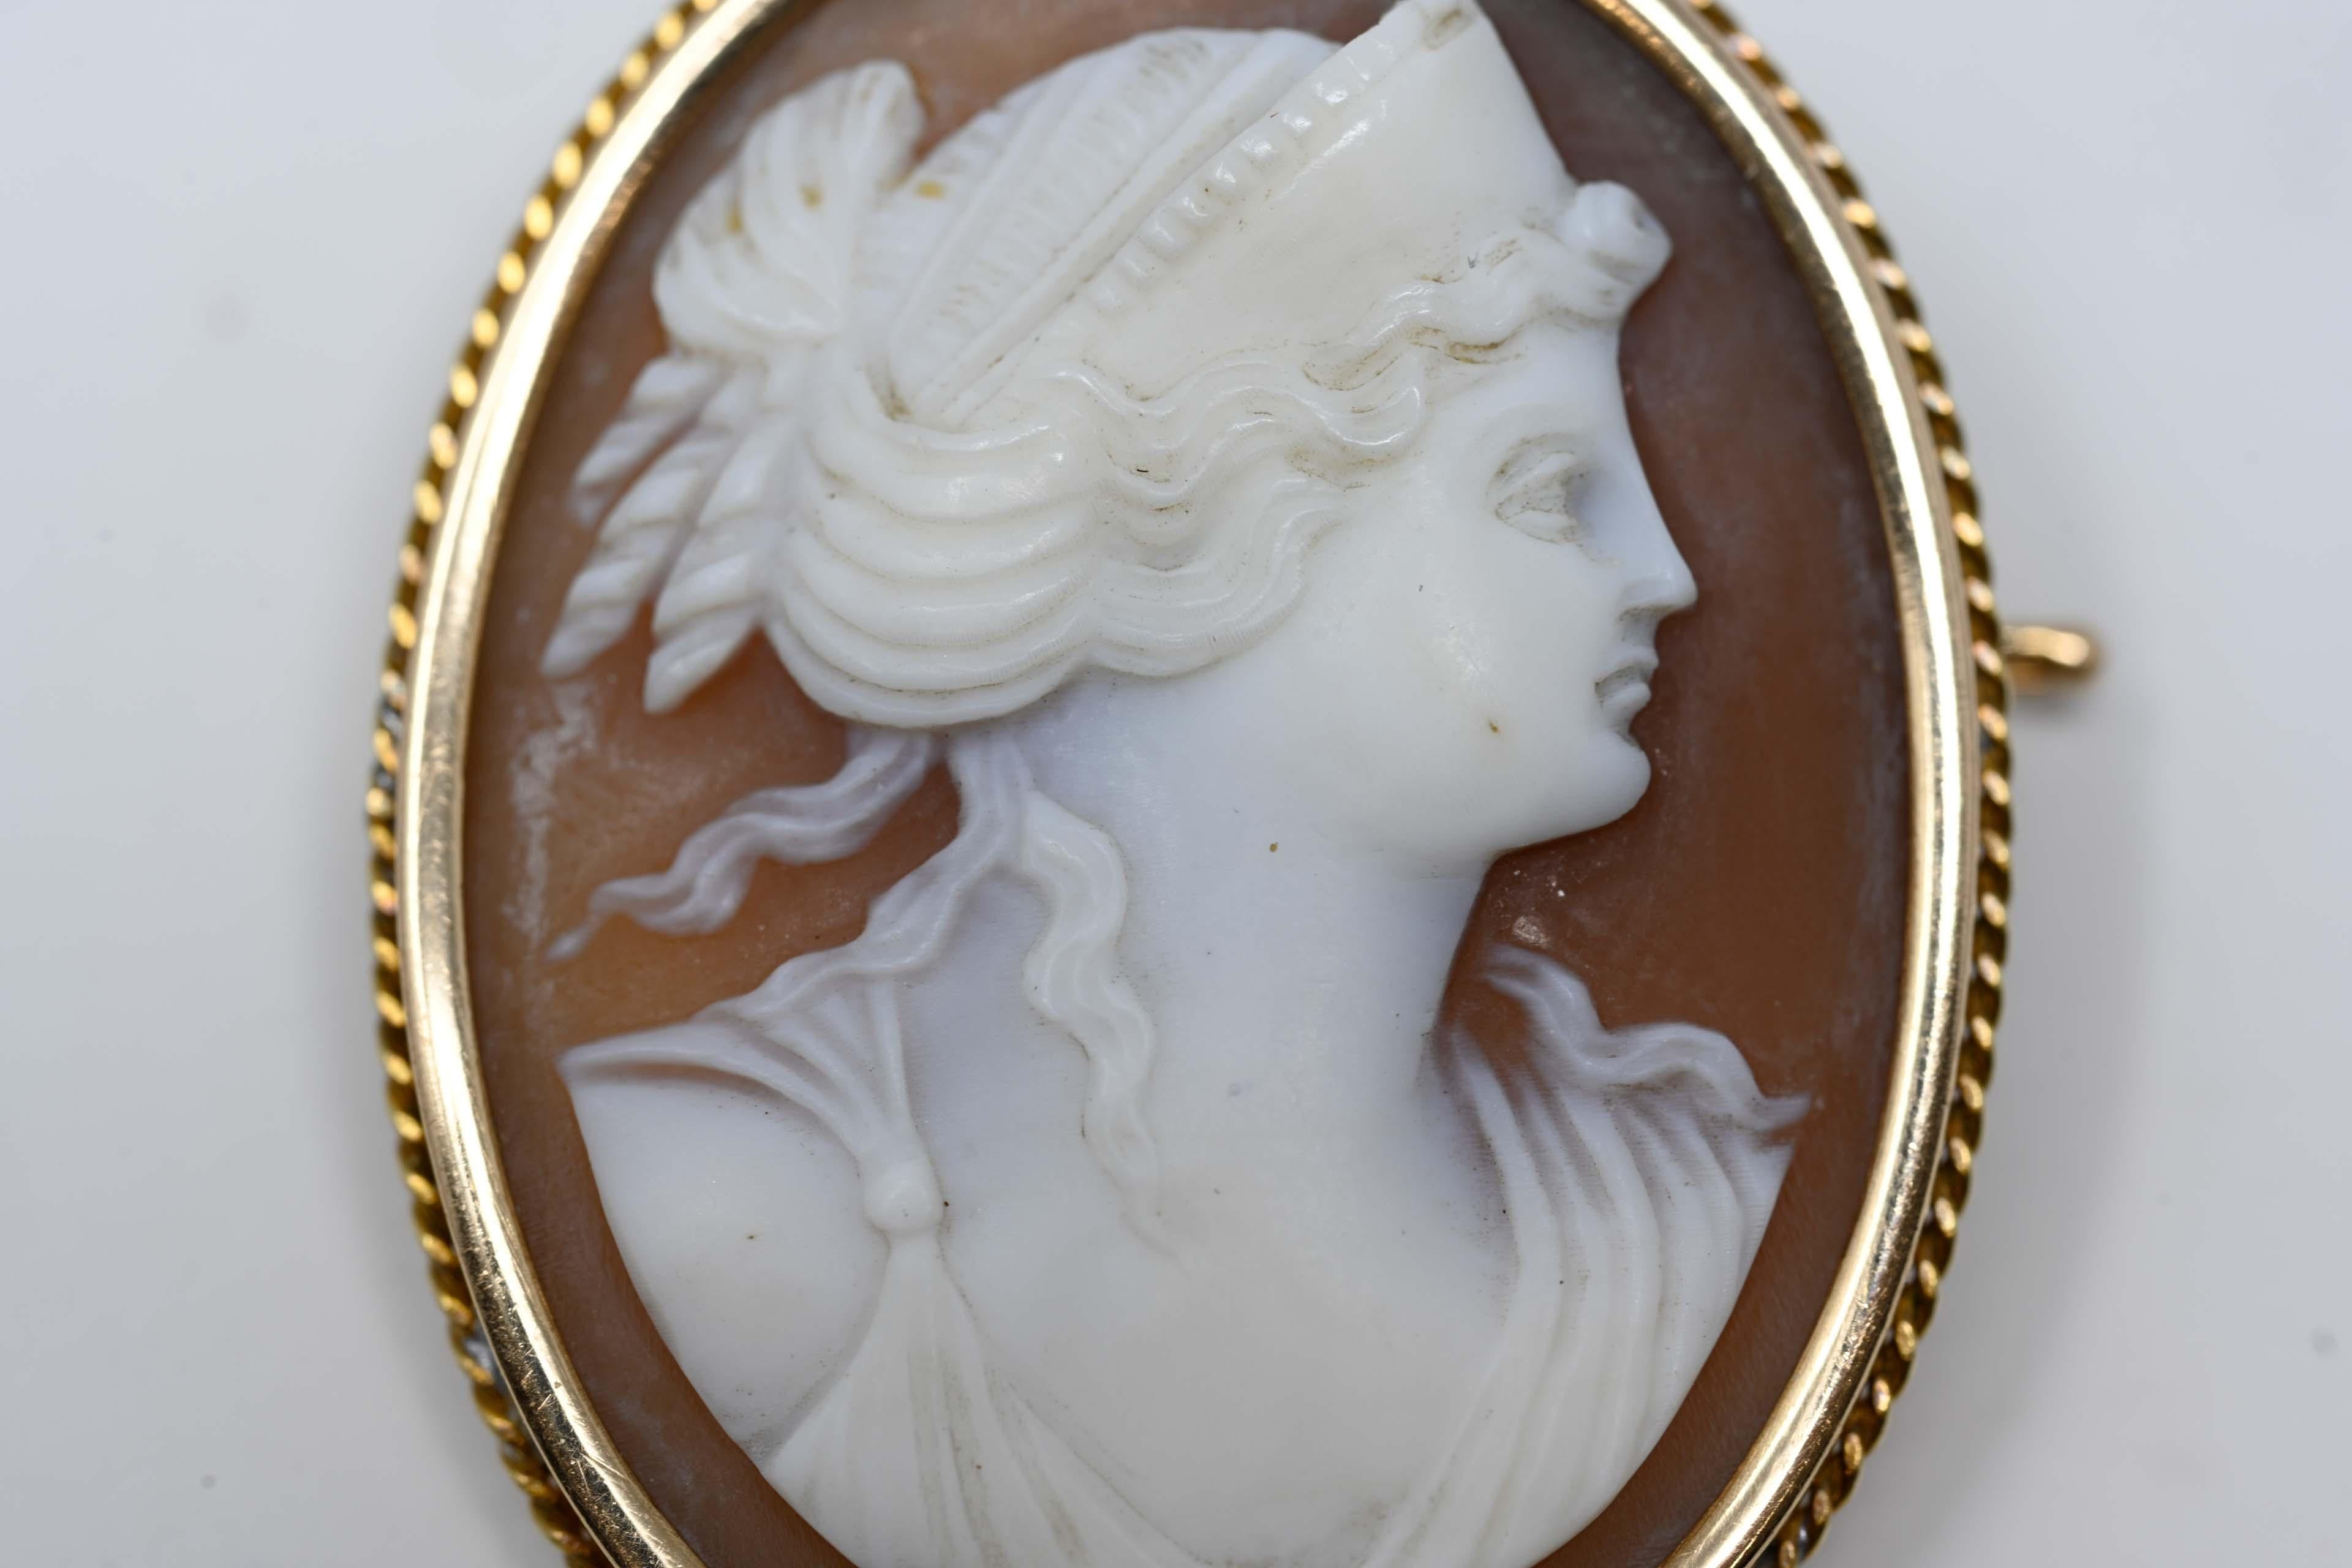 Victorian 18k yellow gold cameo shell carving brooch featuring a portrait of a lady, early 1900. Not marked but acid tested. Made in Italy, measures 36.5 mm x 28mm, in good condition and weighs 8.5 grams.